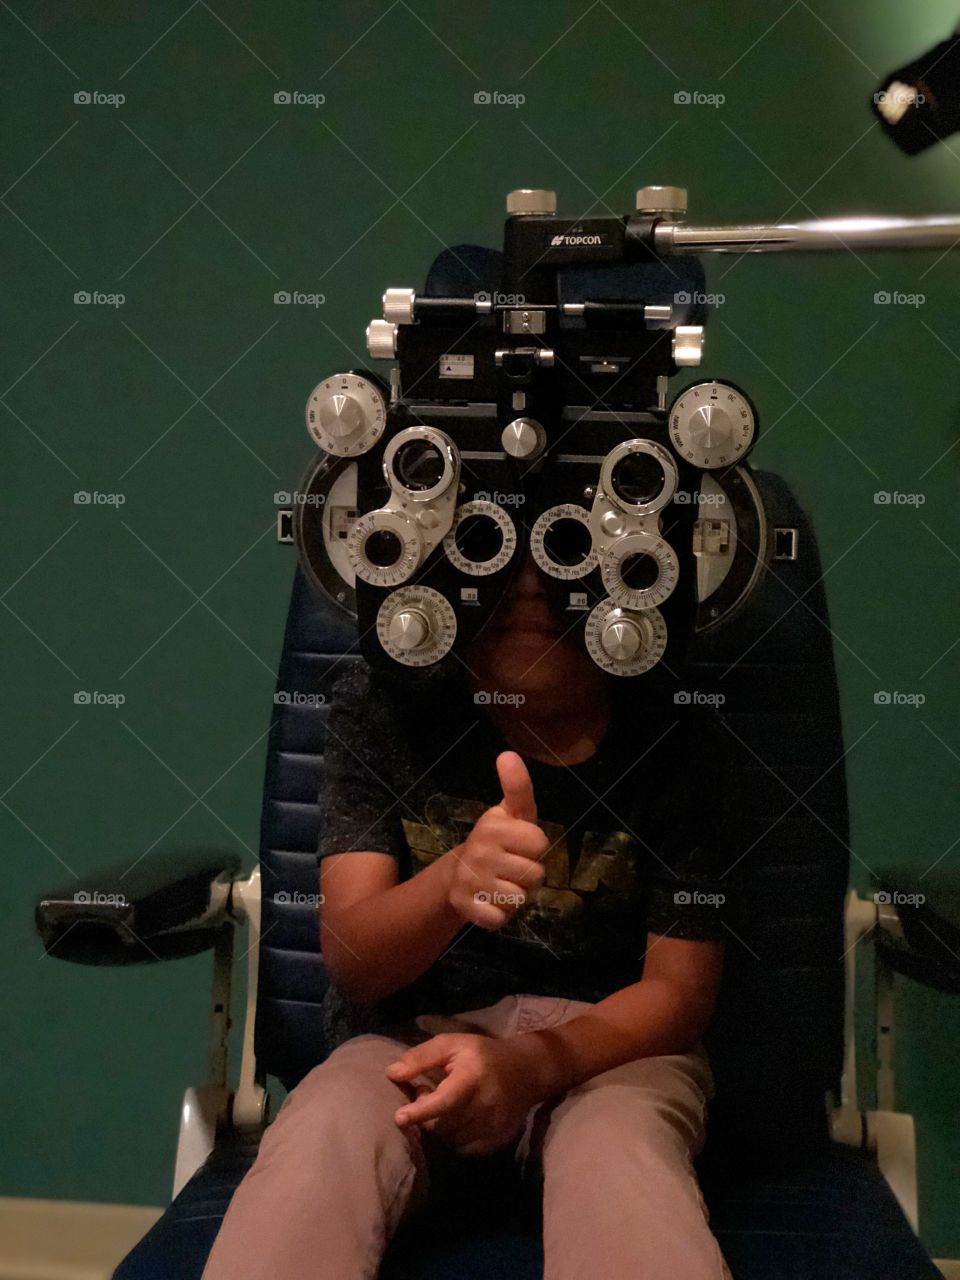 Getting a thorough eye exam is sometimes important, a little nerve racking. I just pretend I am a robot with many many eyes.